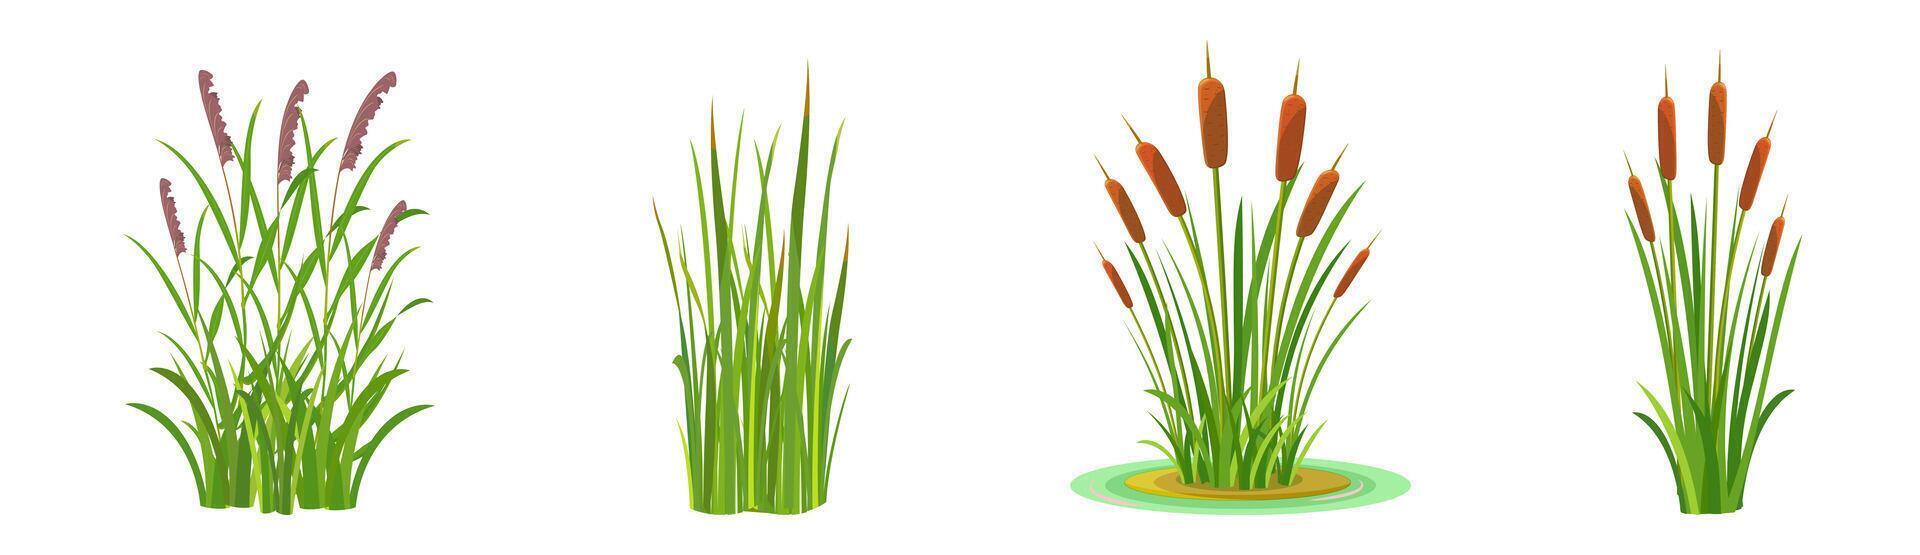 Elements of grass and cattail with reeds on a white background. Tall aquatic vegetation. marsh plants. vector